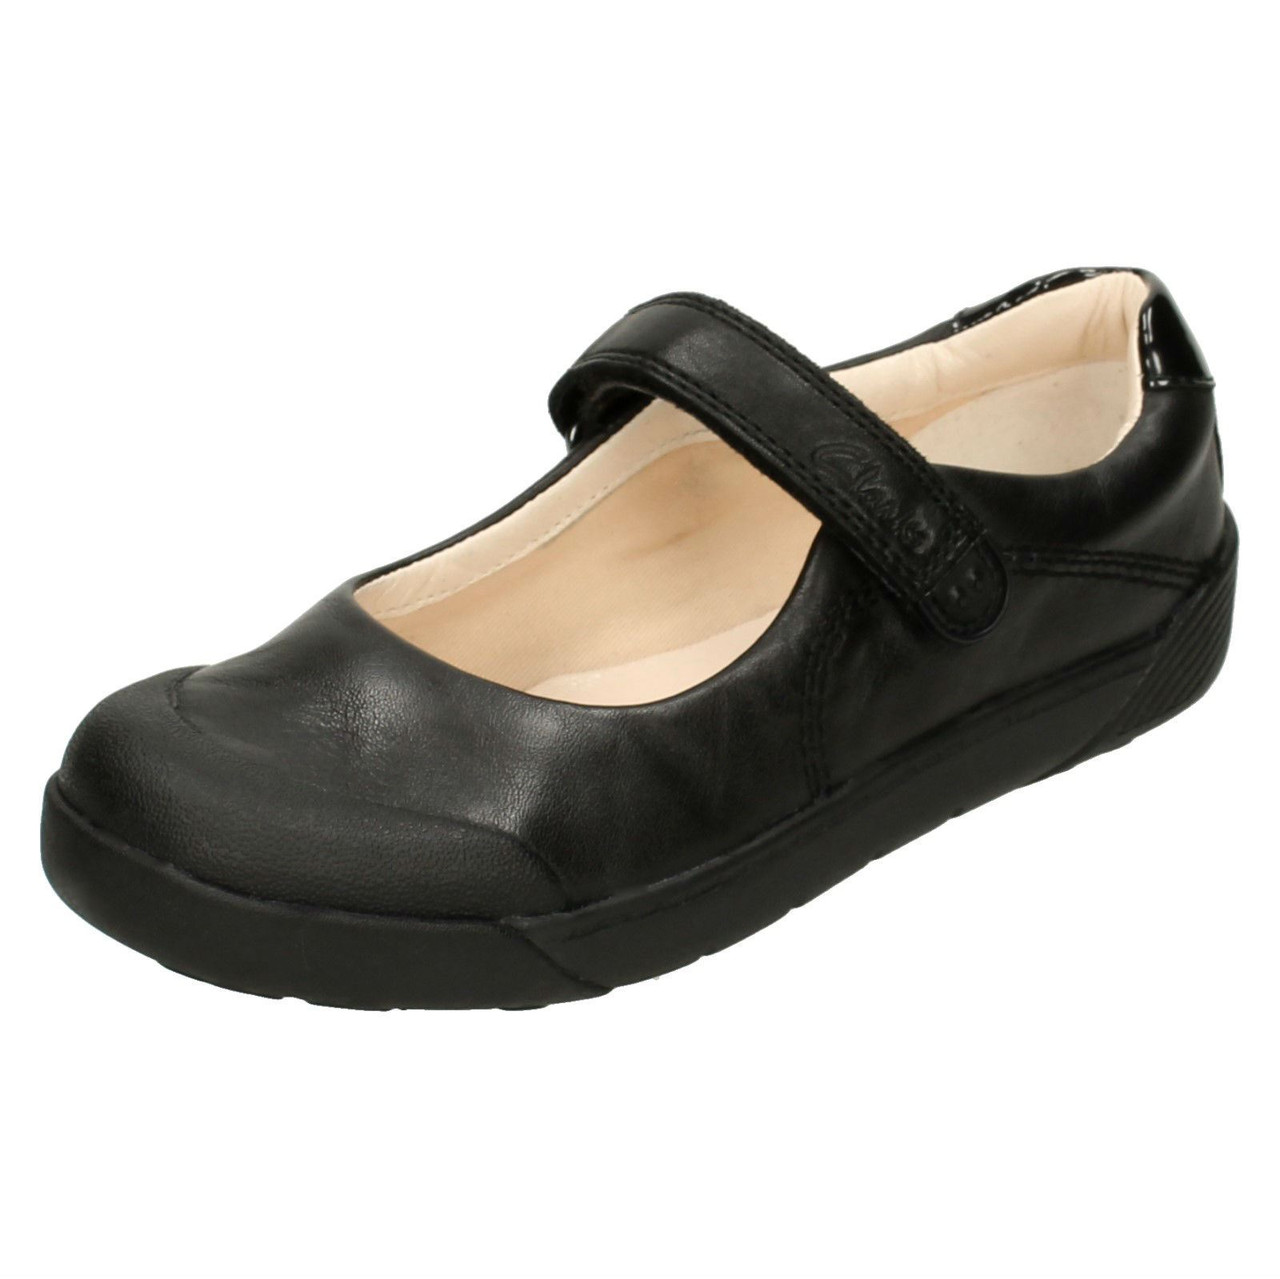 clarks school shoes offers